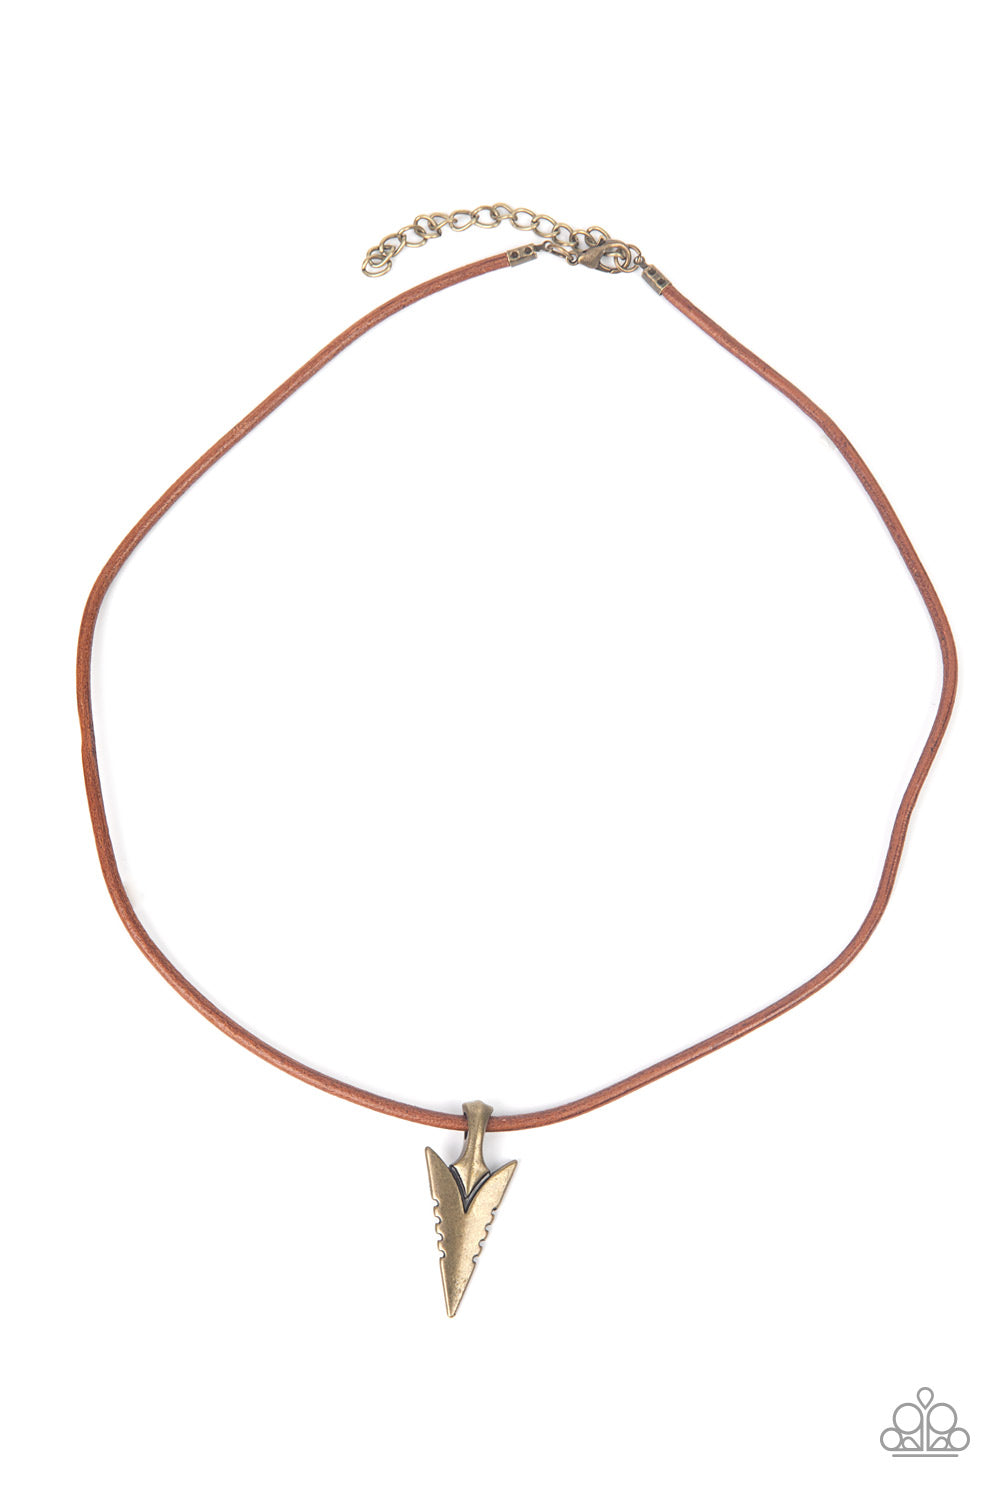 Pharaohs Arrow Brass Urban Necklace - Paparazzi Accessories  A brass arrowhead inspired pendant glides along a leathery brown cord below the collar, creating authentic edge. Features an adjustable clasp closure.  Sold as one individual necklace.